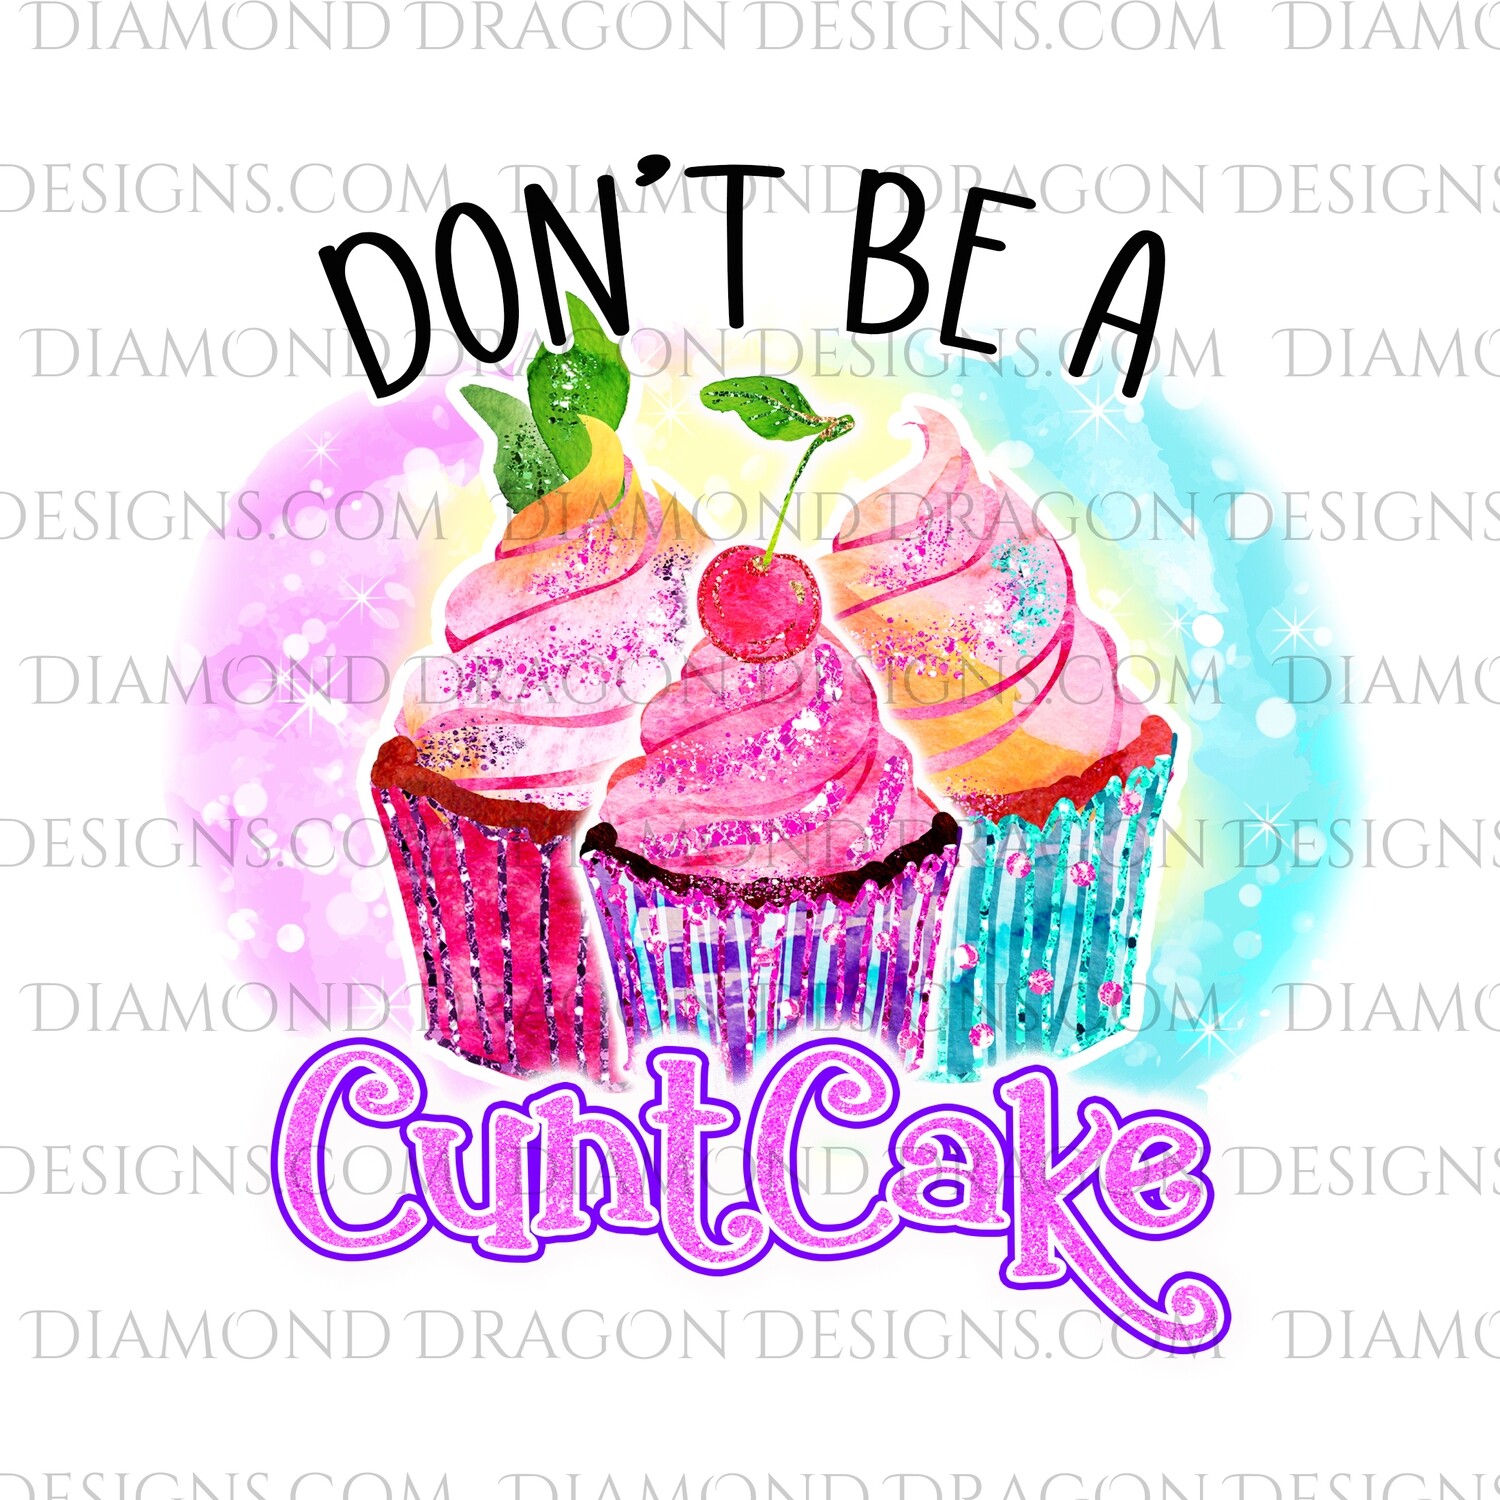 Adult - Don't Be a Cuntcake, Sparkle Watercolor, Digital Image